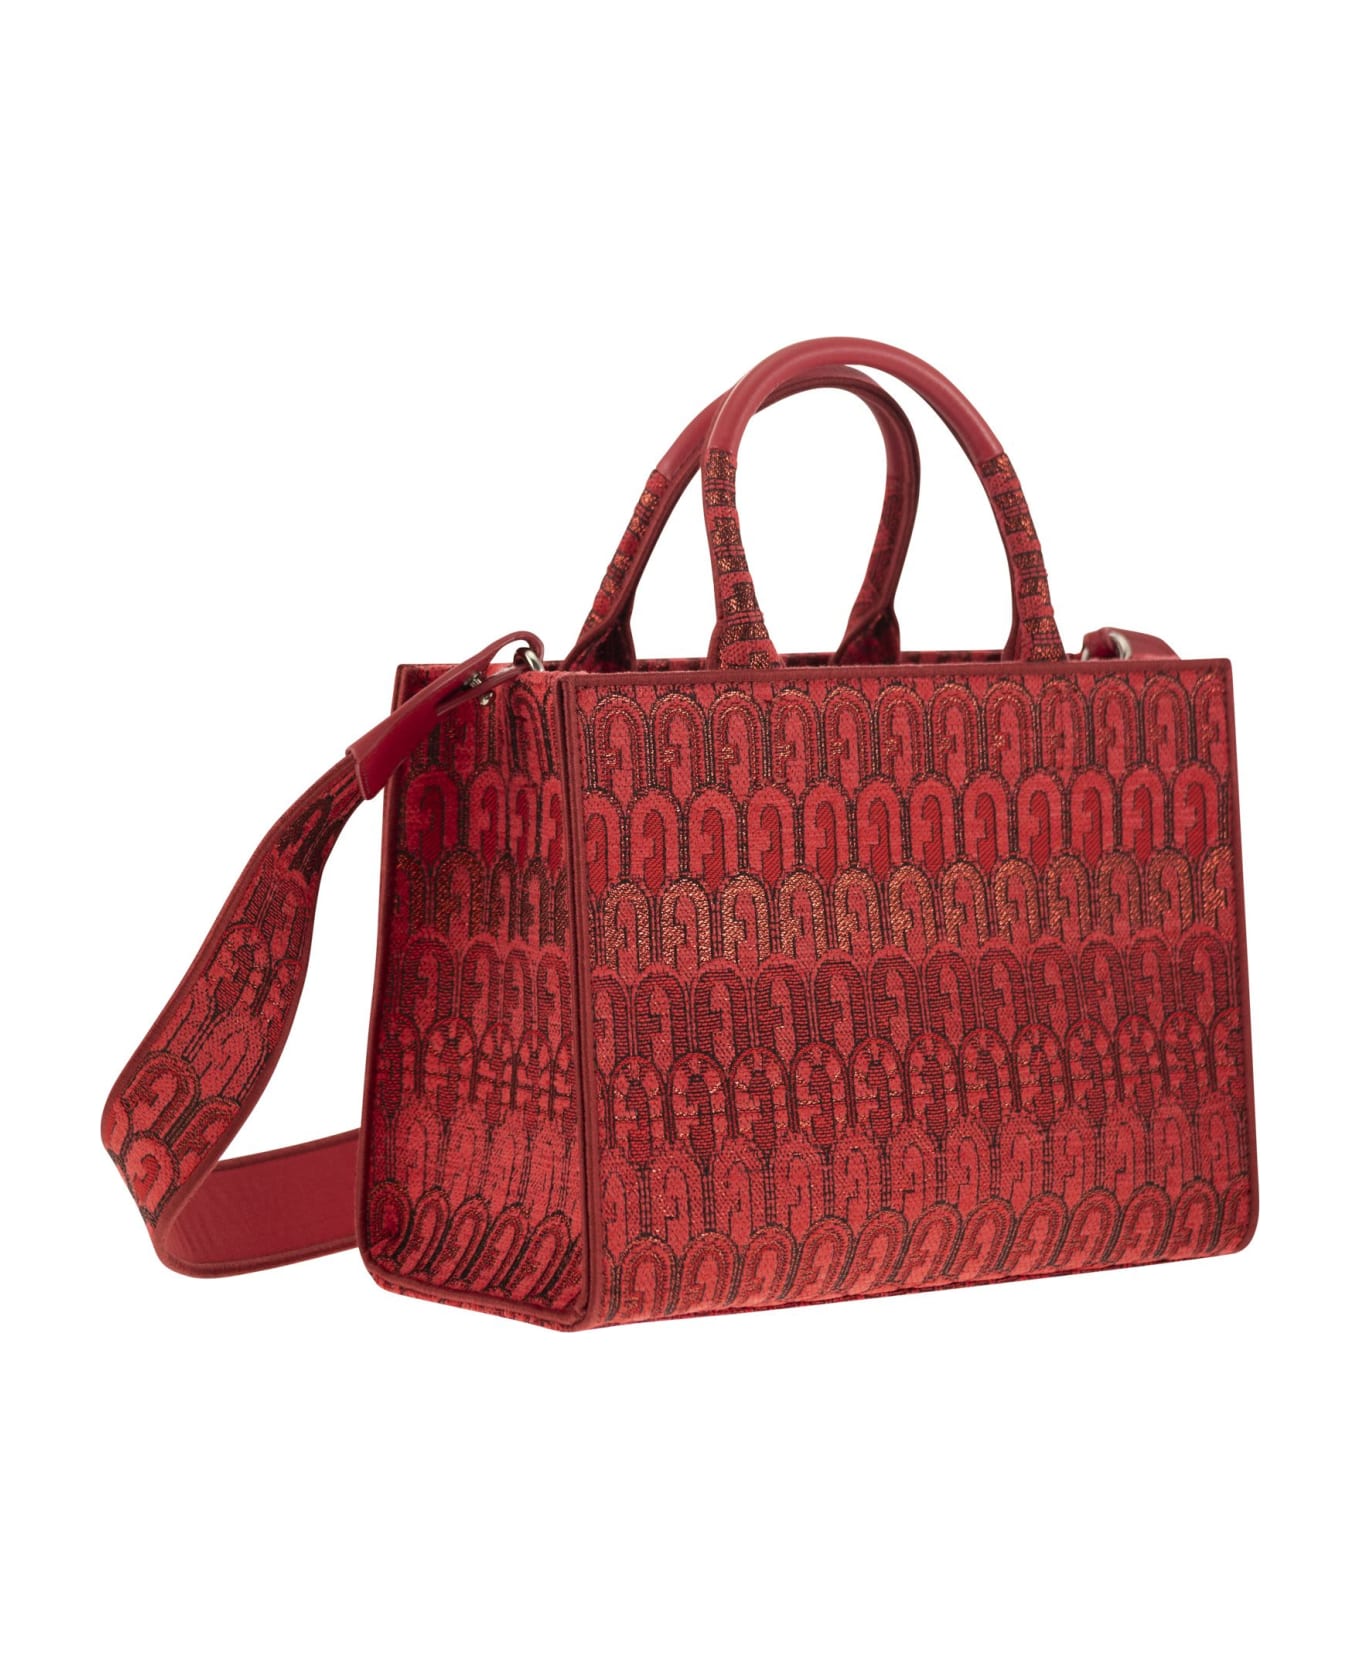 Furla Opportunity - Tote Bag Small - Red トートバッグ